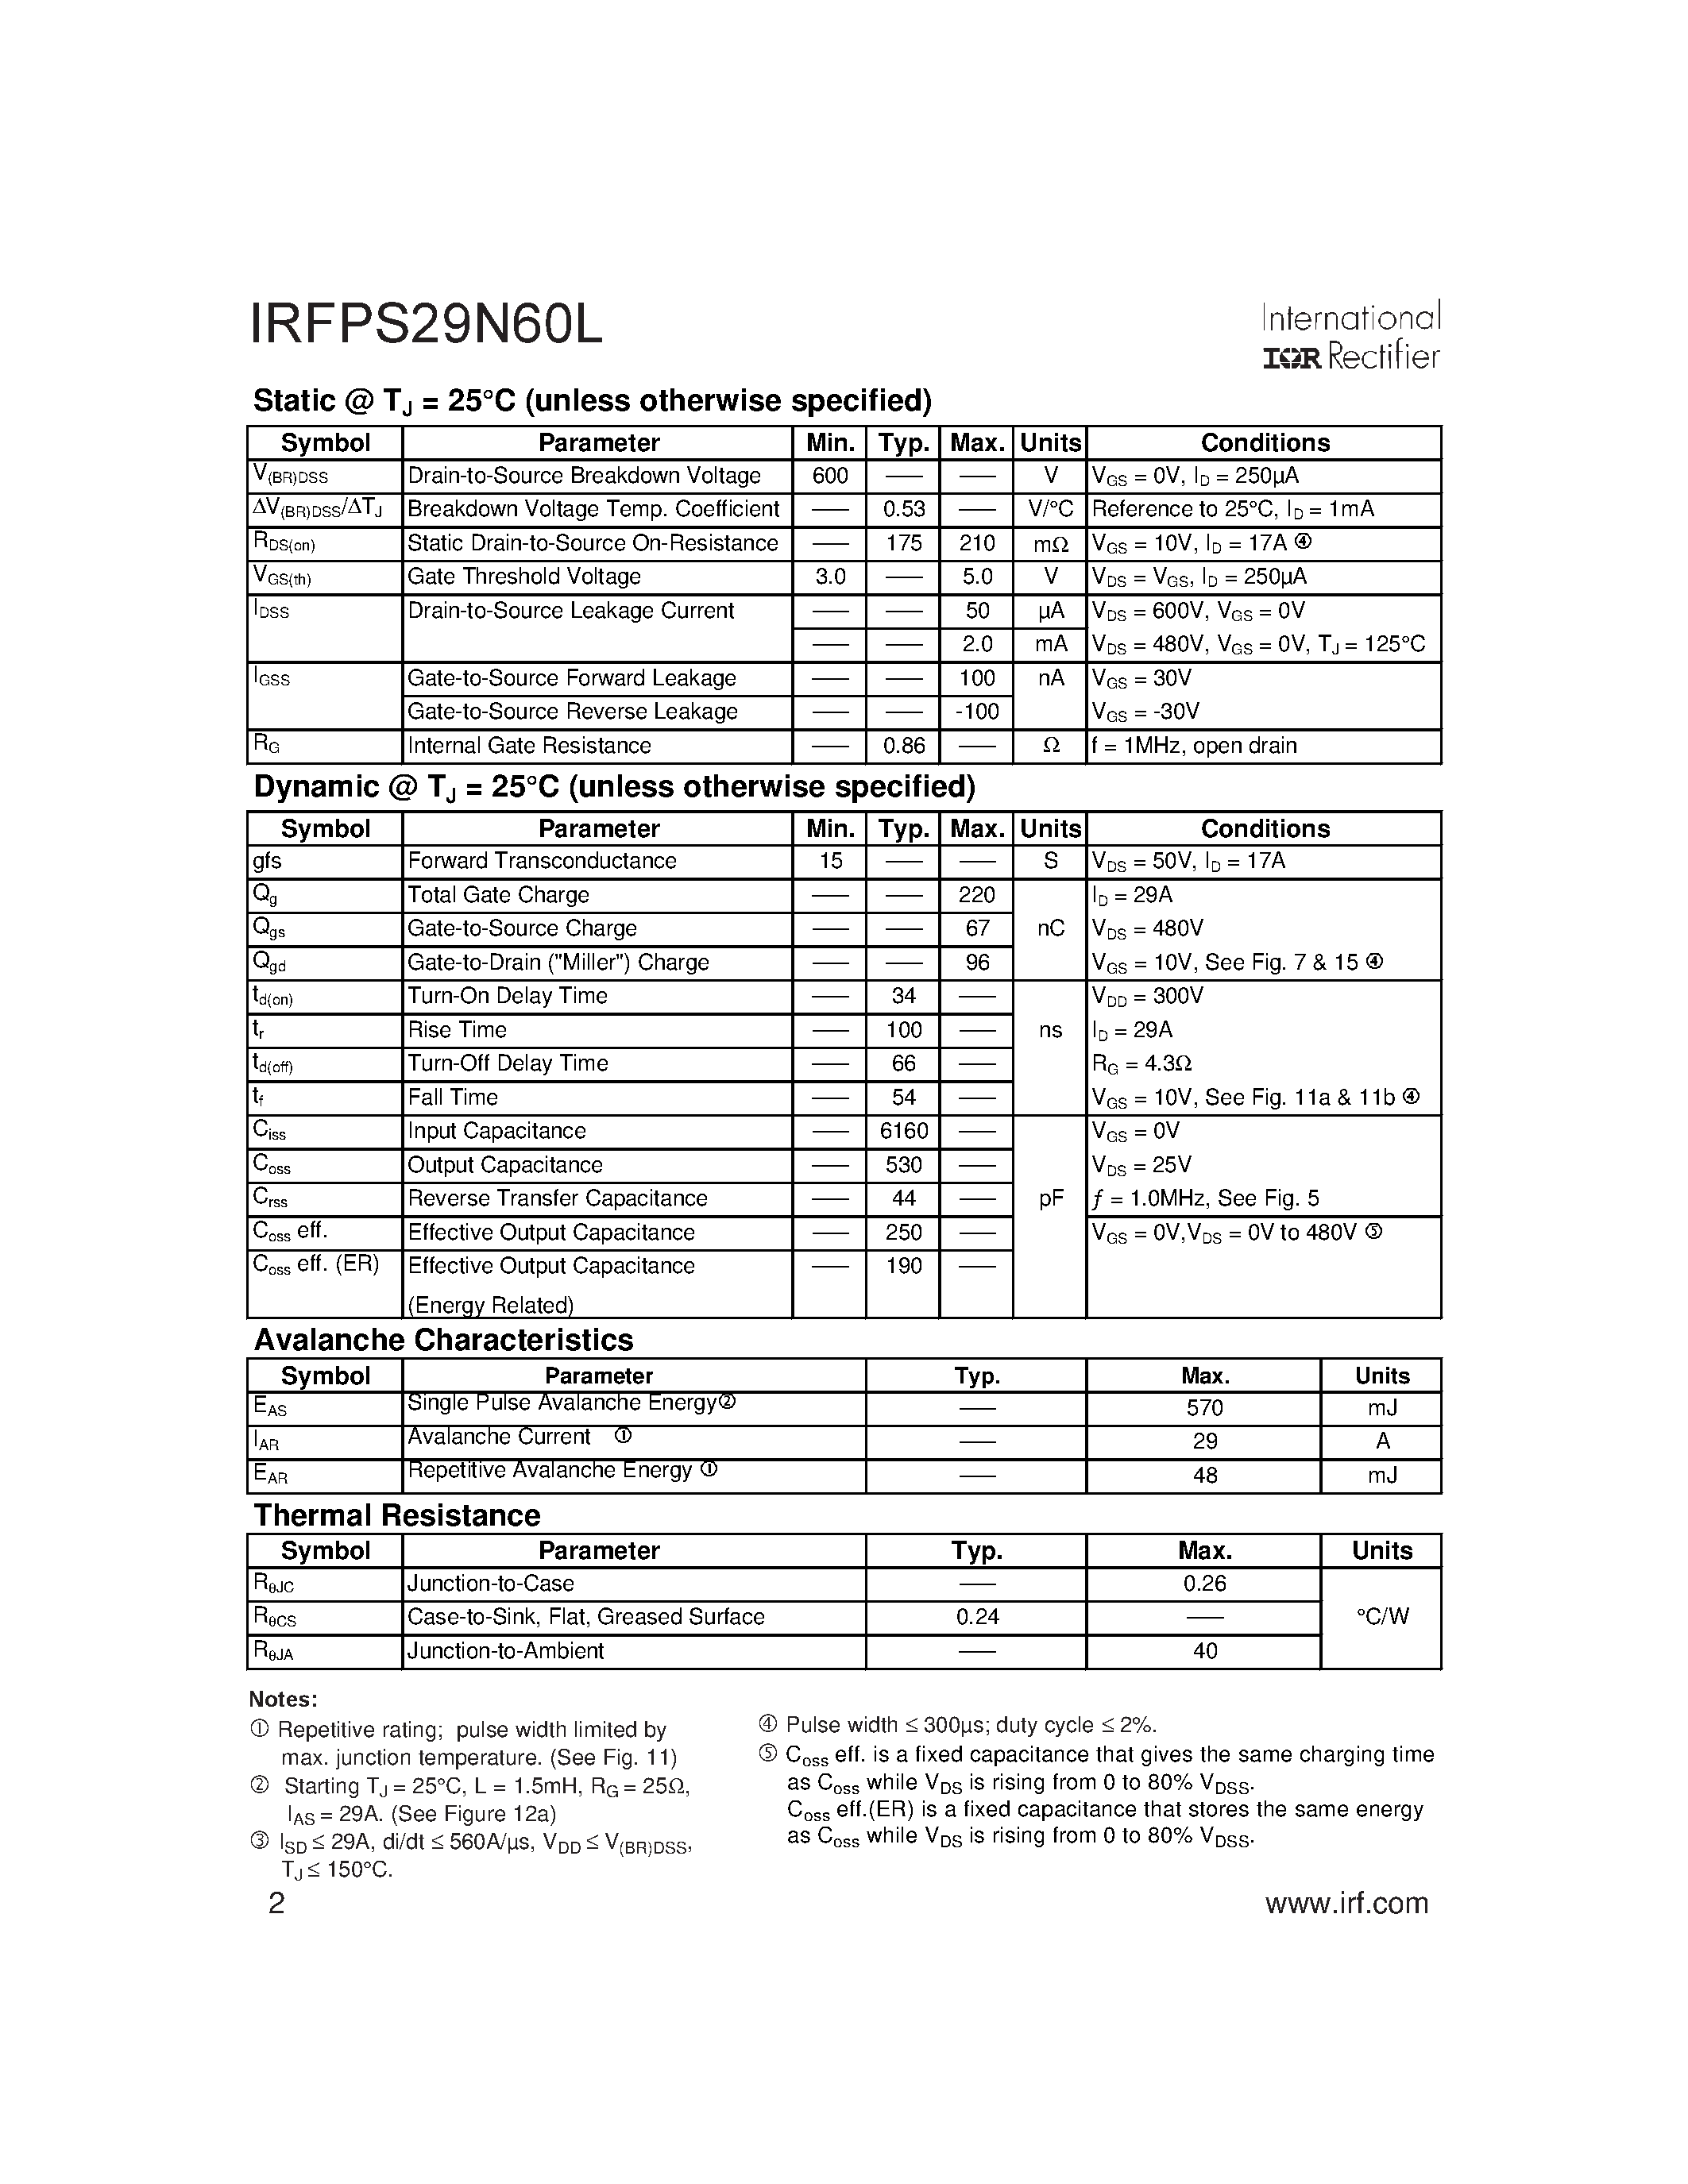 Datasheet IRFPS29N60L - SMPS MOSFET page 2